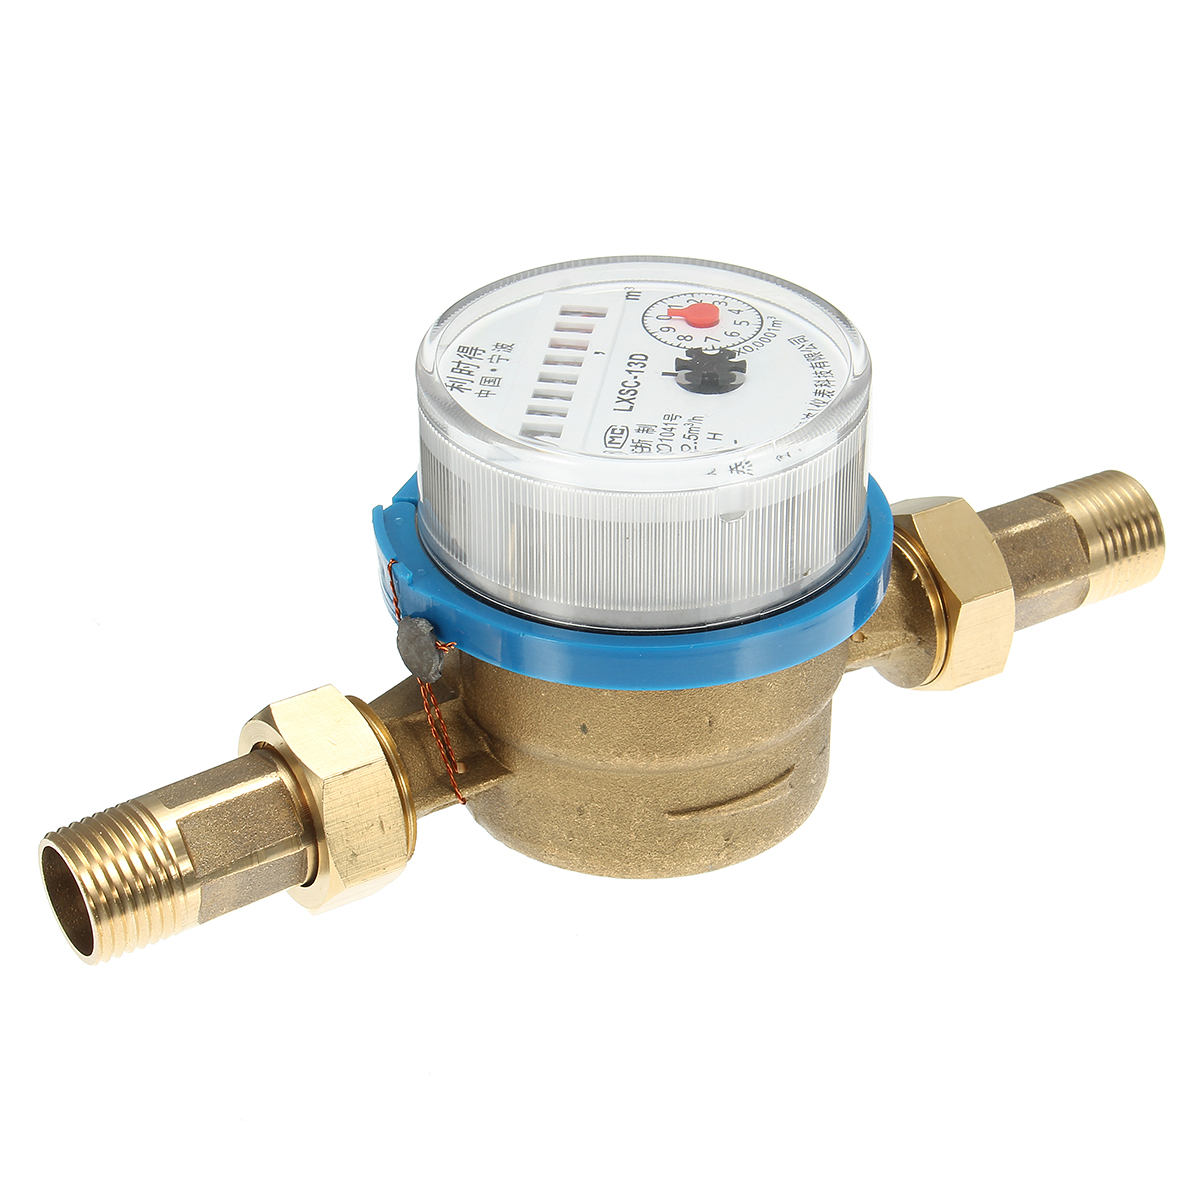 Water-Meter-Flow-Cold--Hot-Water-House-Garden-Various-Water-Hose-Pipe-Connectors-15m3h-1289573